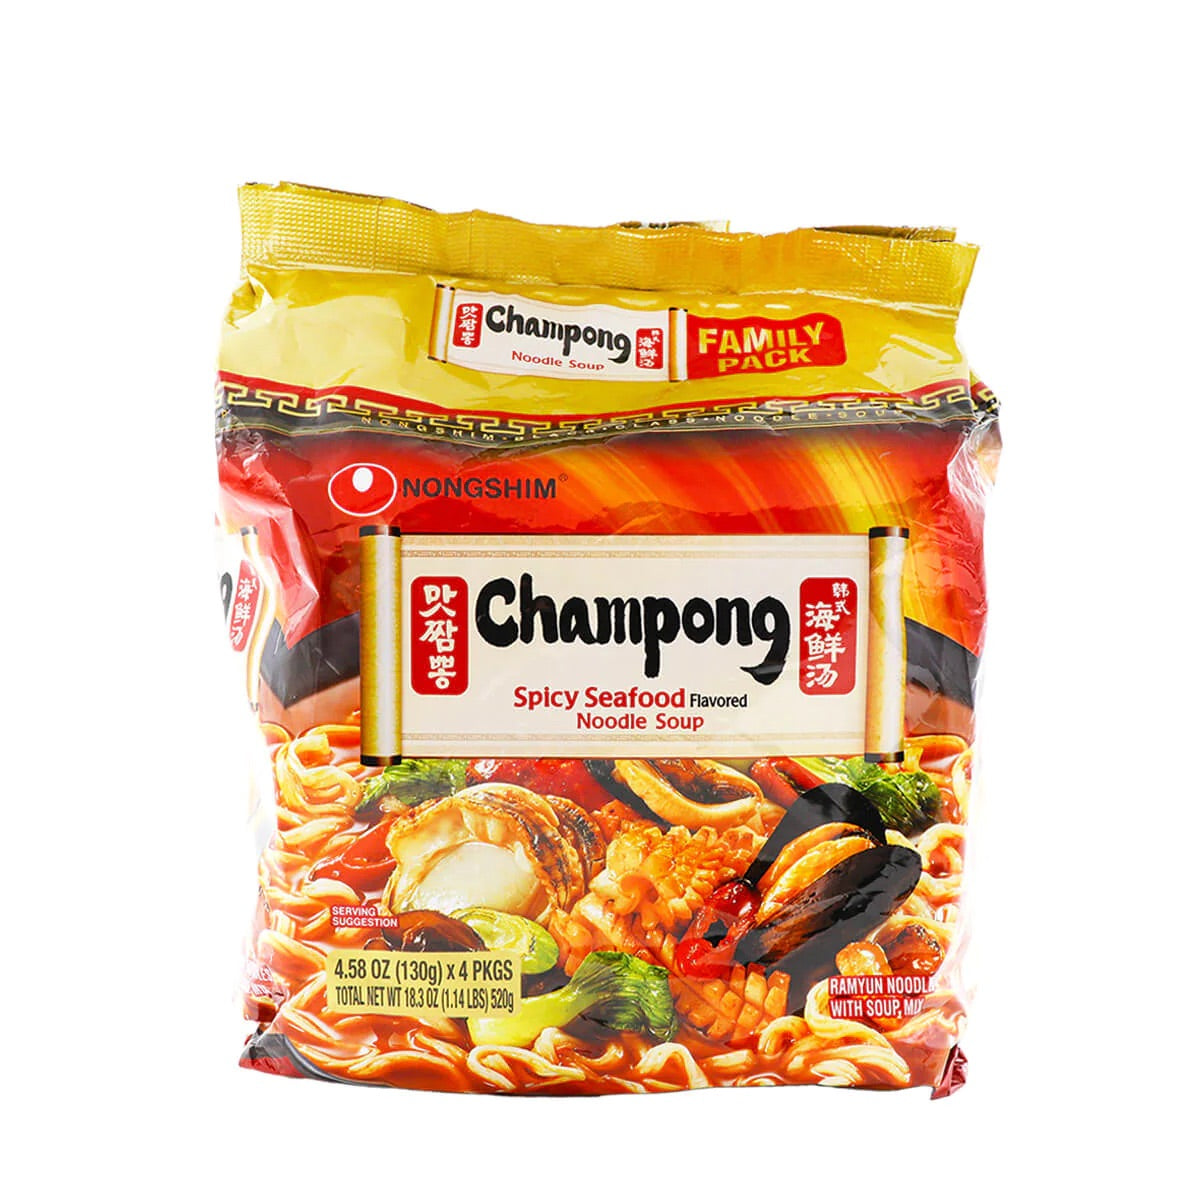 Nongshim Champong Spicy Seafood (4 paquetes) - 520g/18.3oz